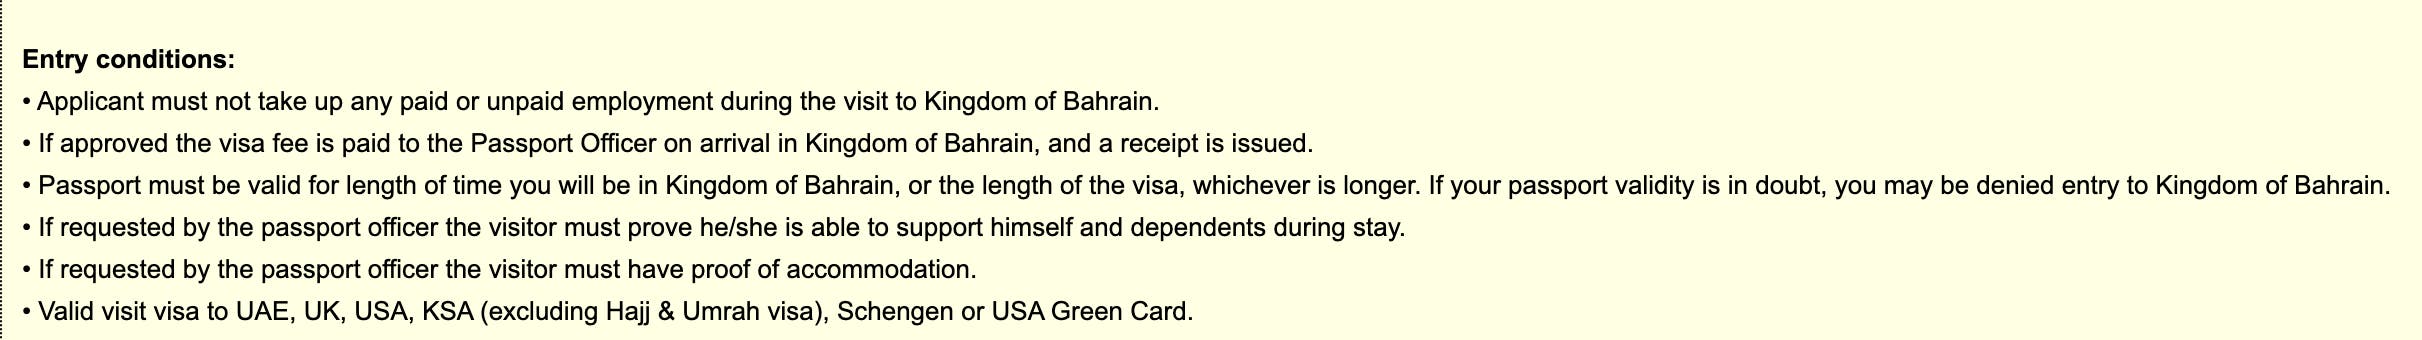 Entry conditions for the Bahrain visa on arrival for Indians.